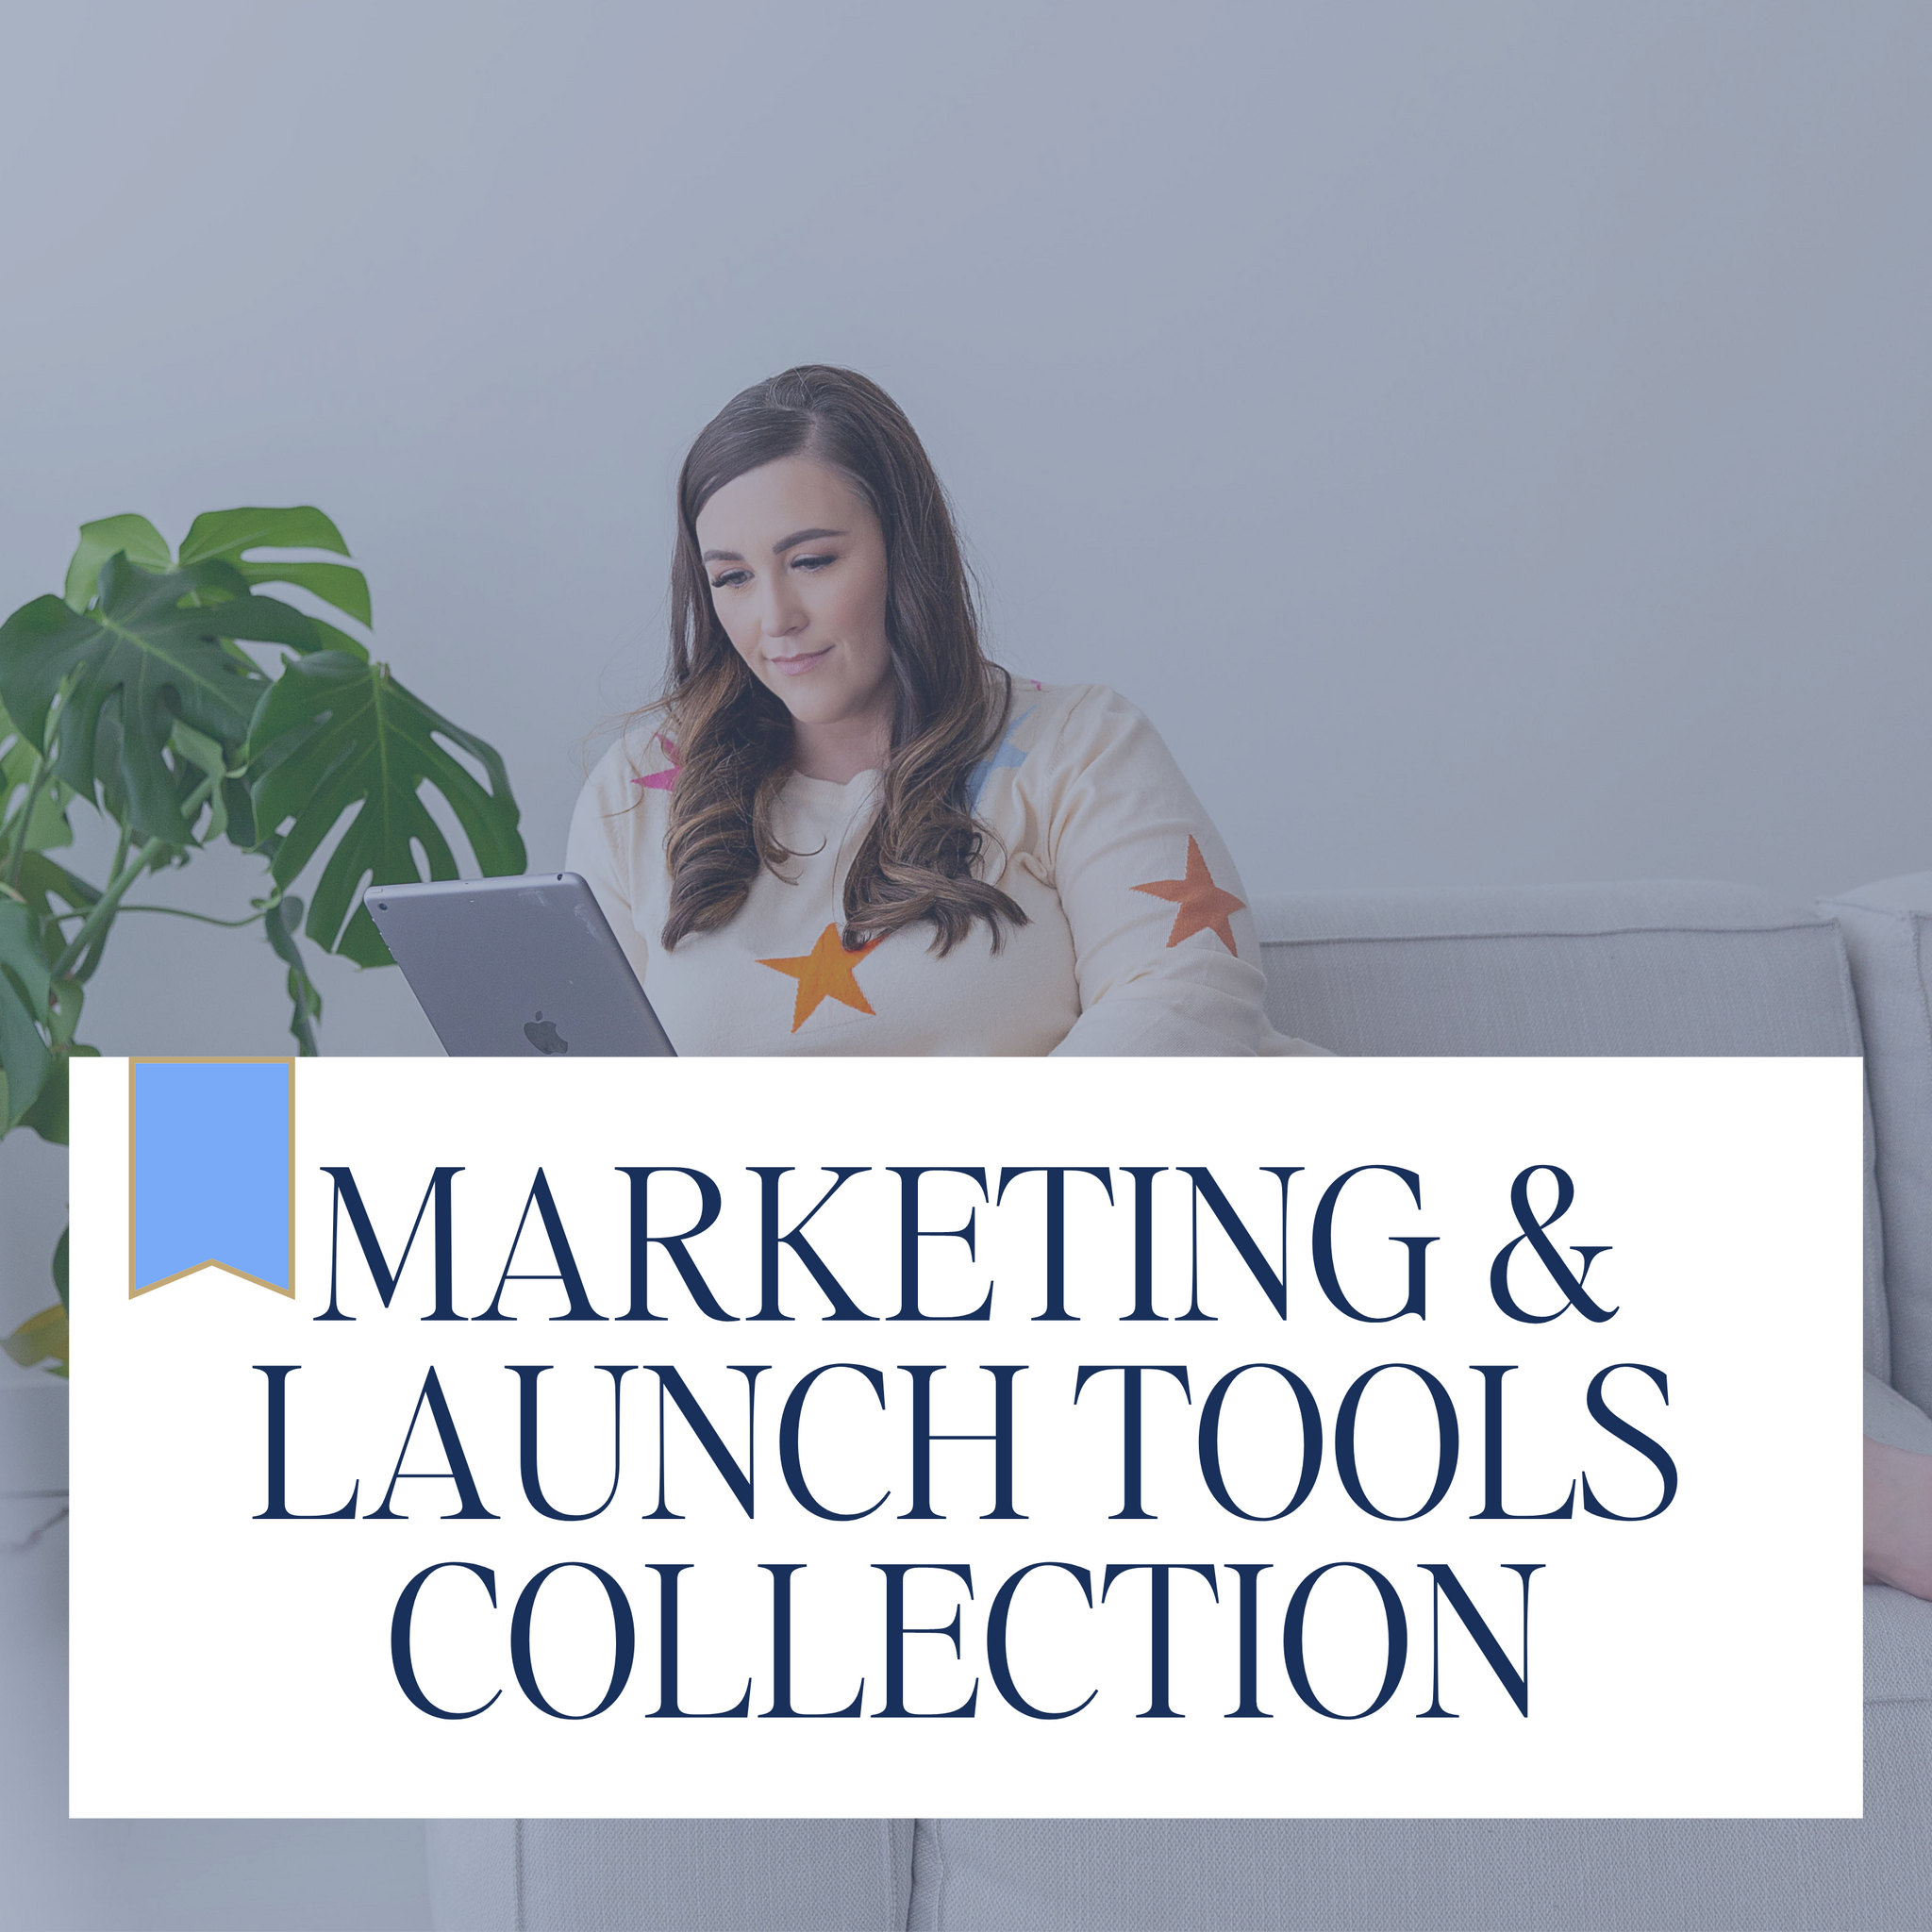 Marketing & Launch Tools Collection